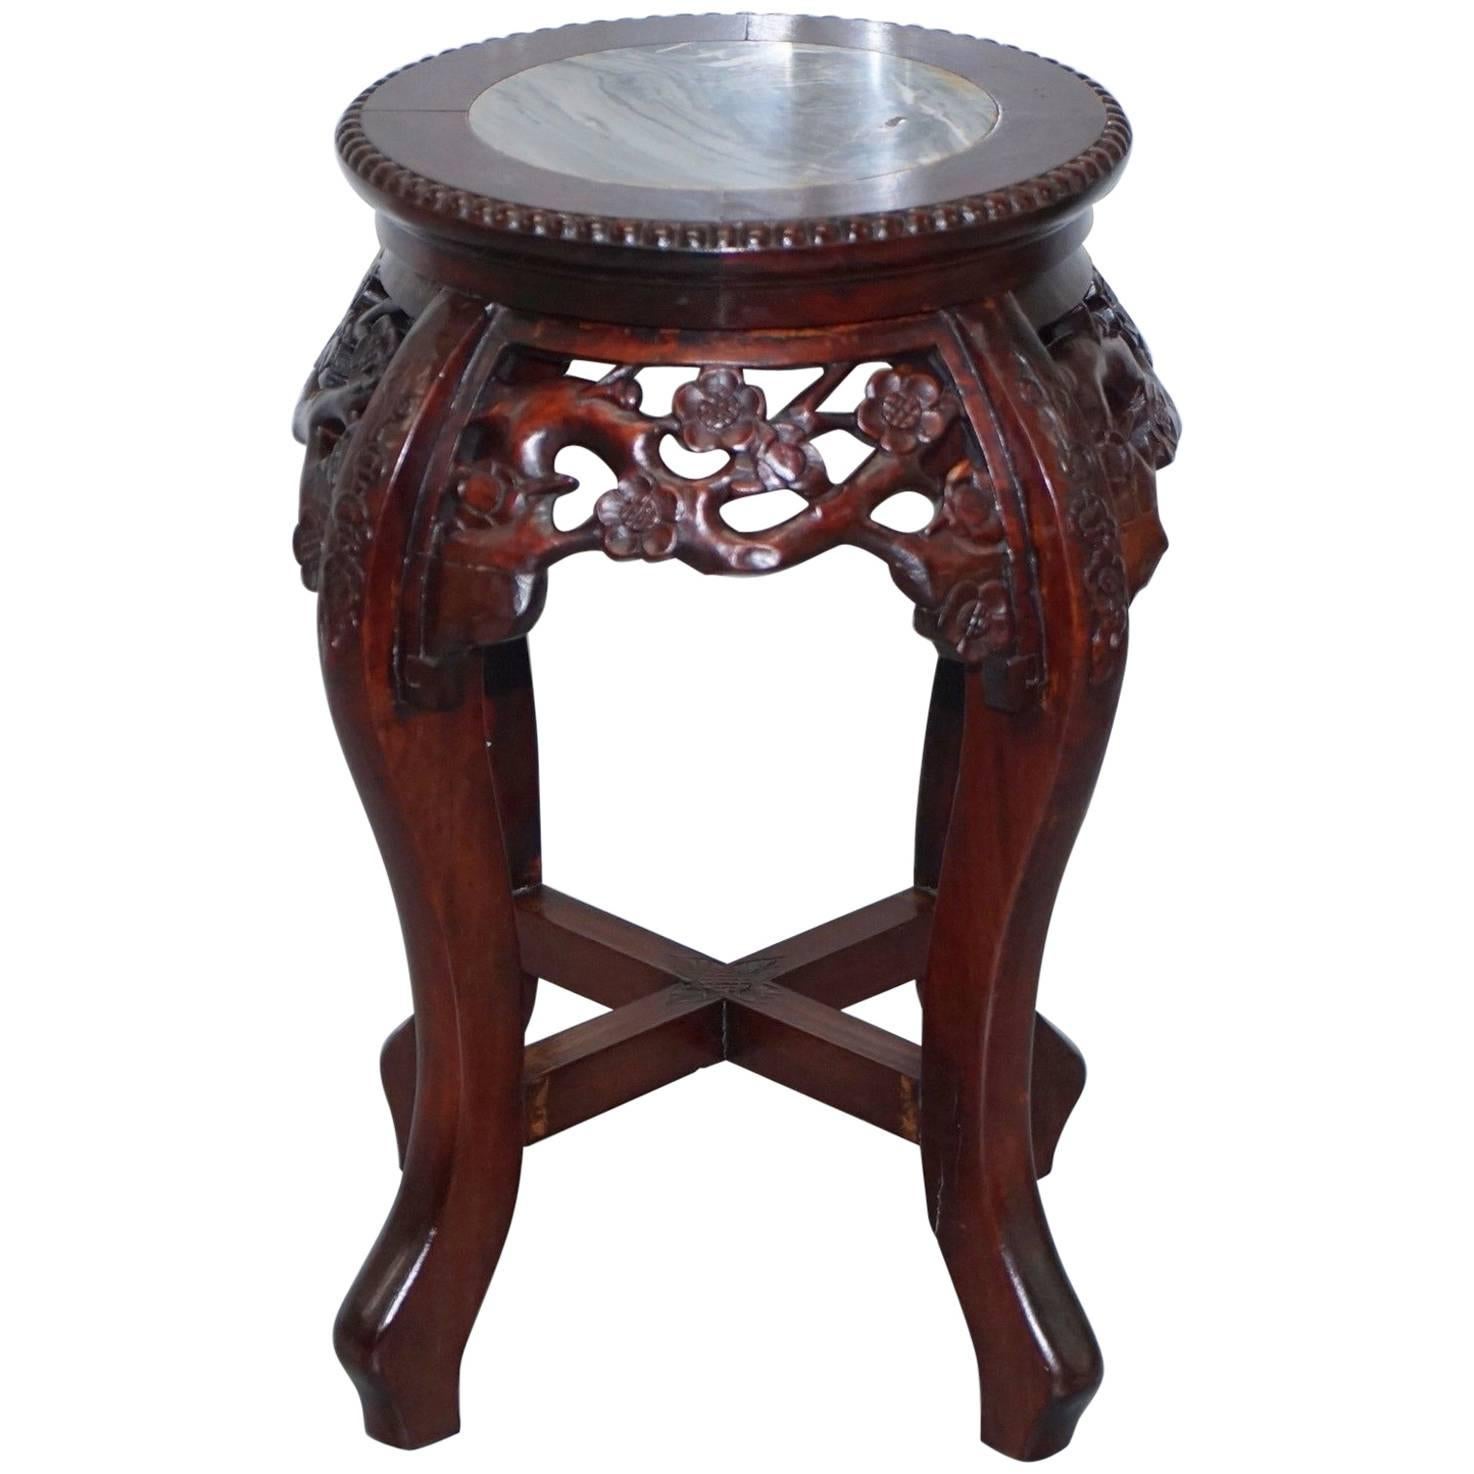 Chinese, circa 1920 Hongmu Floral Tree Carved Jardinière Plant Pot Stand